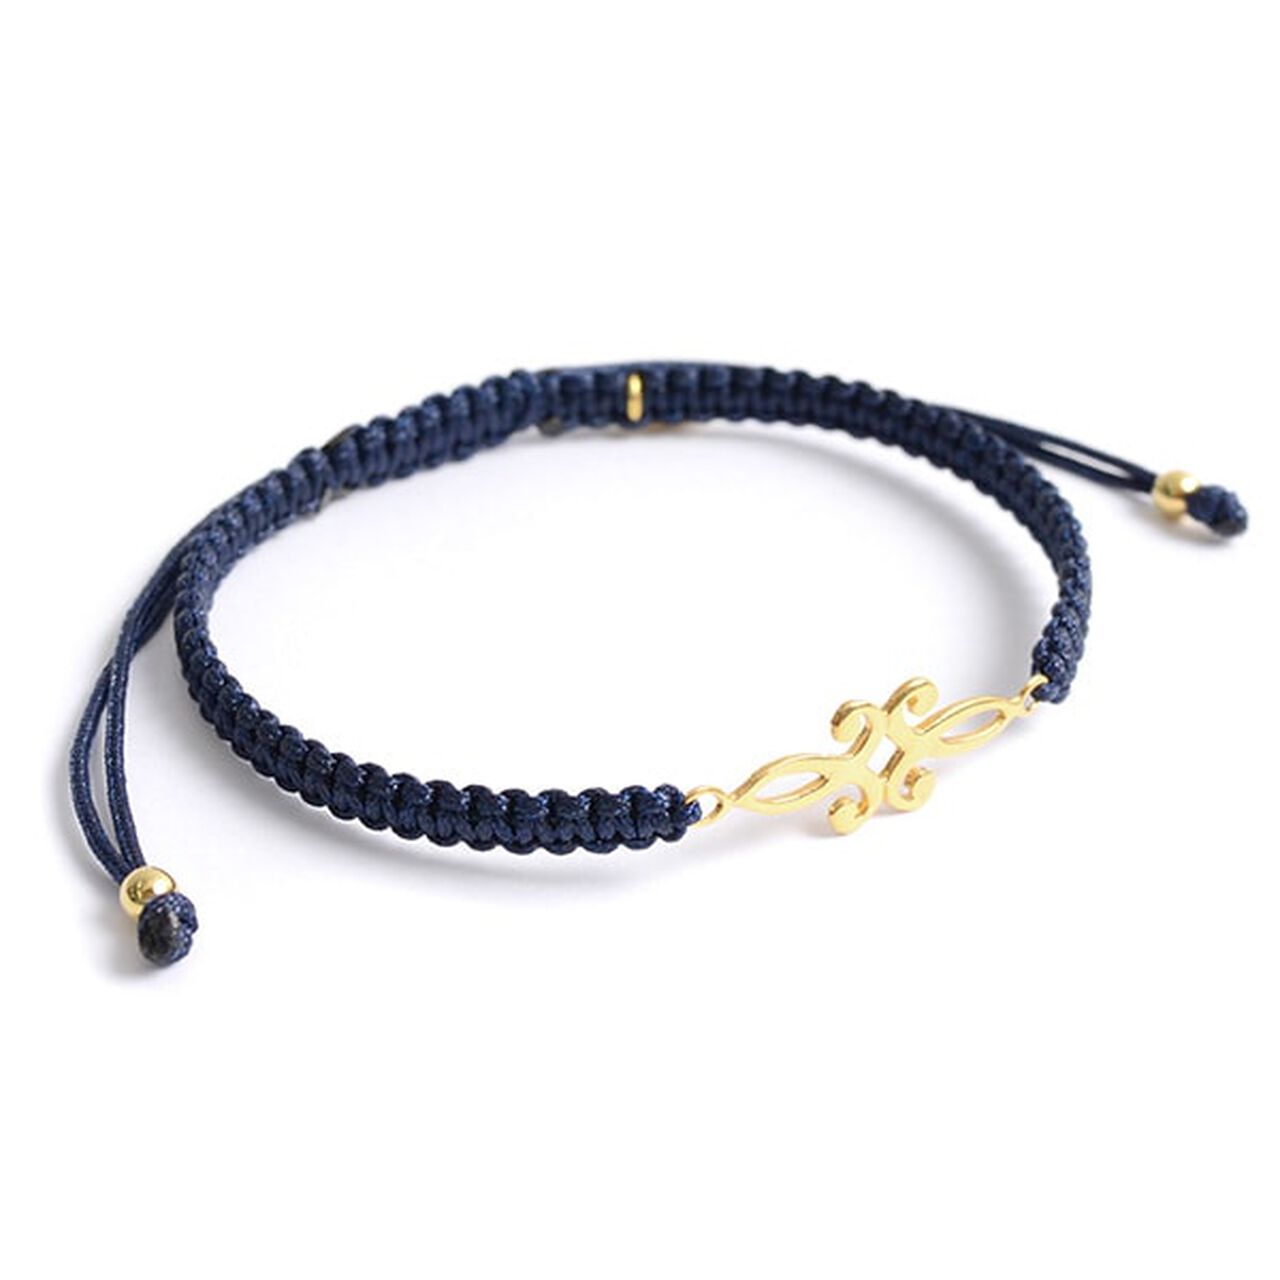 Symmetrical Flower Pattern Notched Cord Anklet,Navy_PinkGold, large image number 0